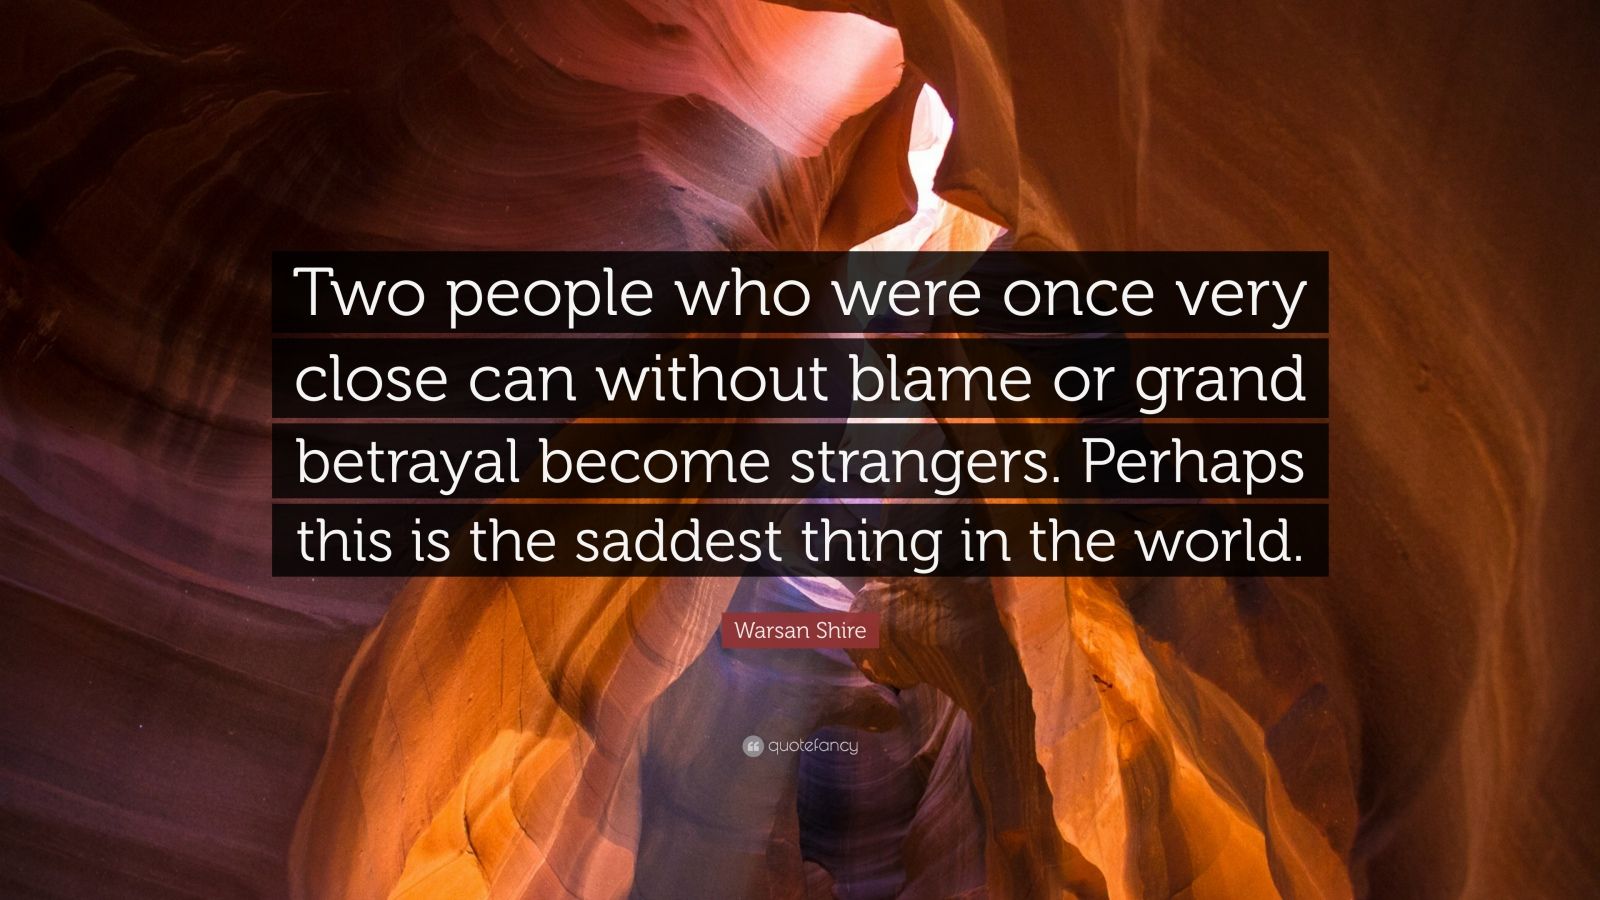 Betrayal Quotes (40 wallpapers) - Quotefancy